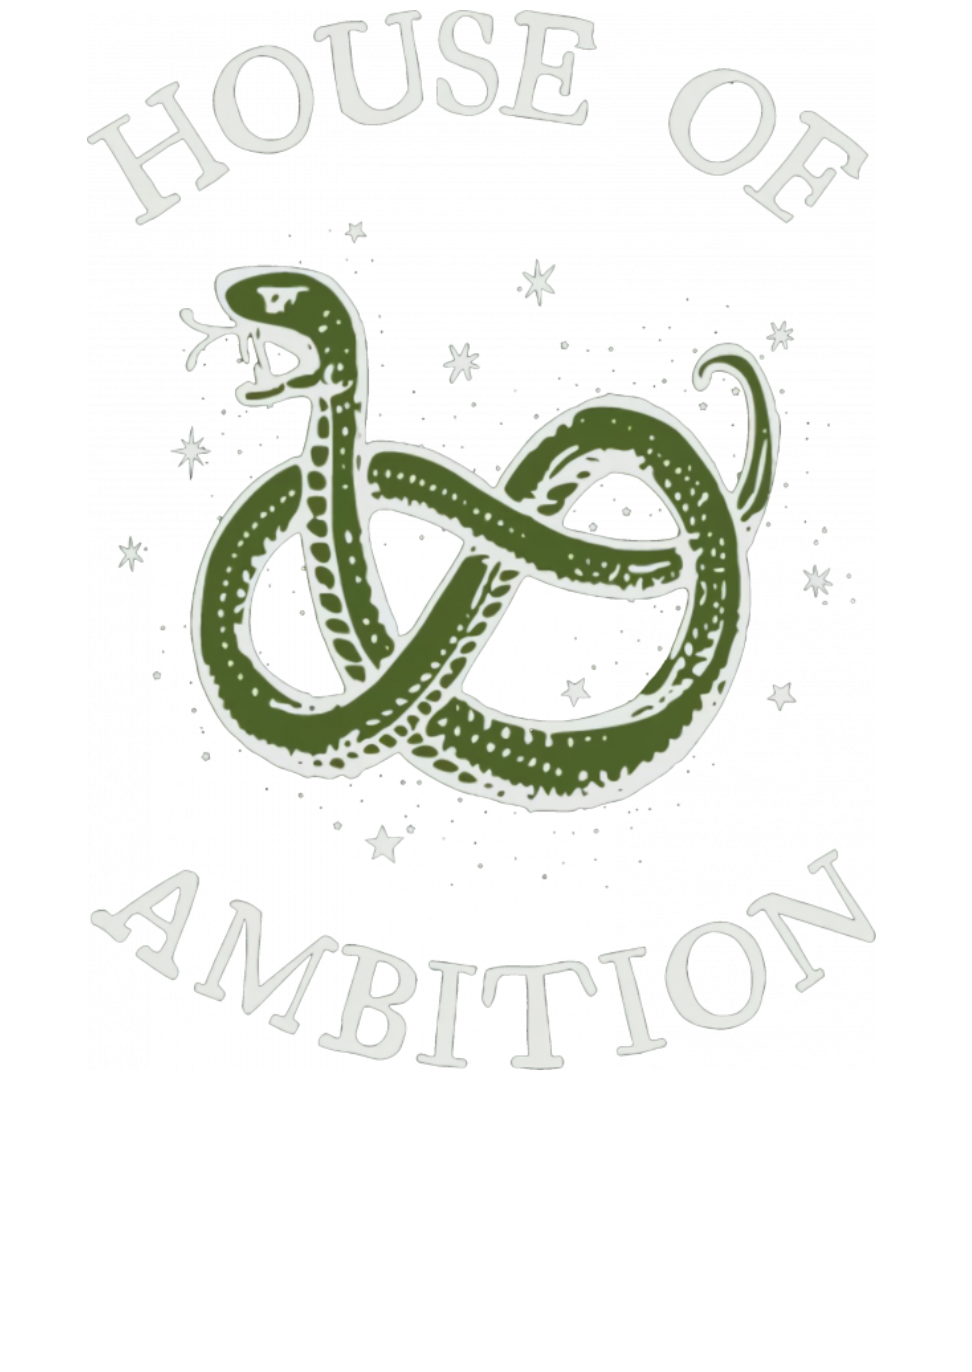 Slytherin Ambition Cunning Pride Snake Harry Potter Coffee Mug, Harry  Potter Slytherin Gifts - Wiseabe Apparels